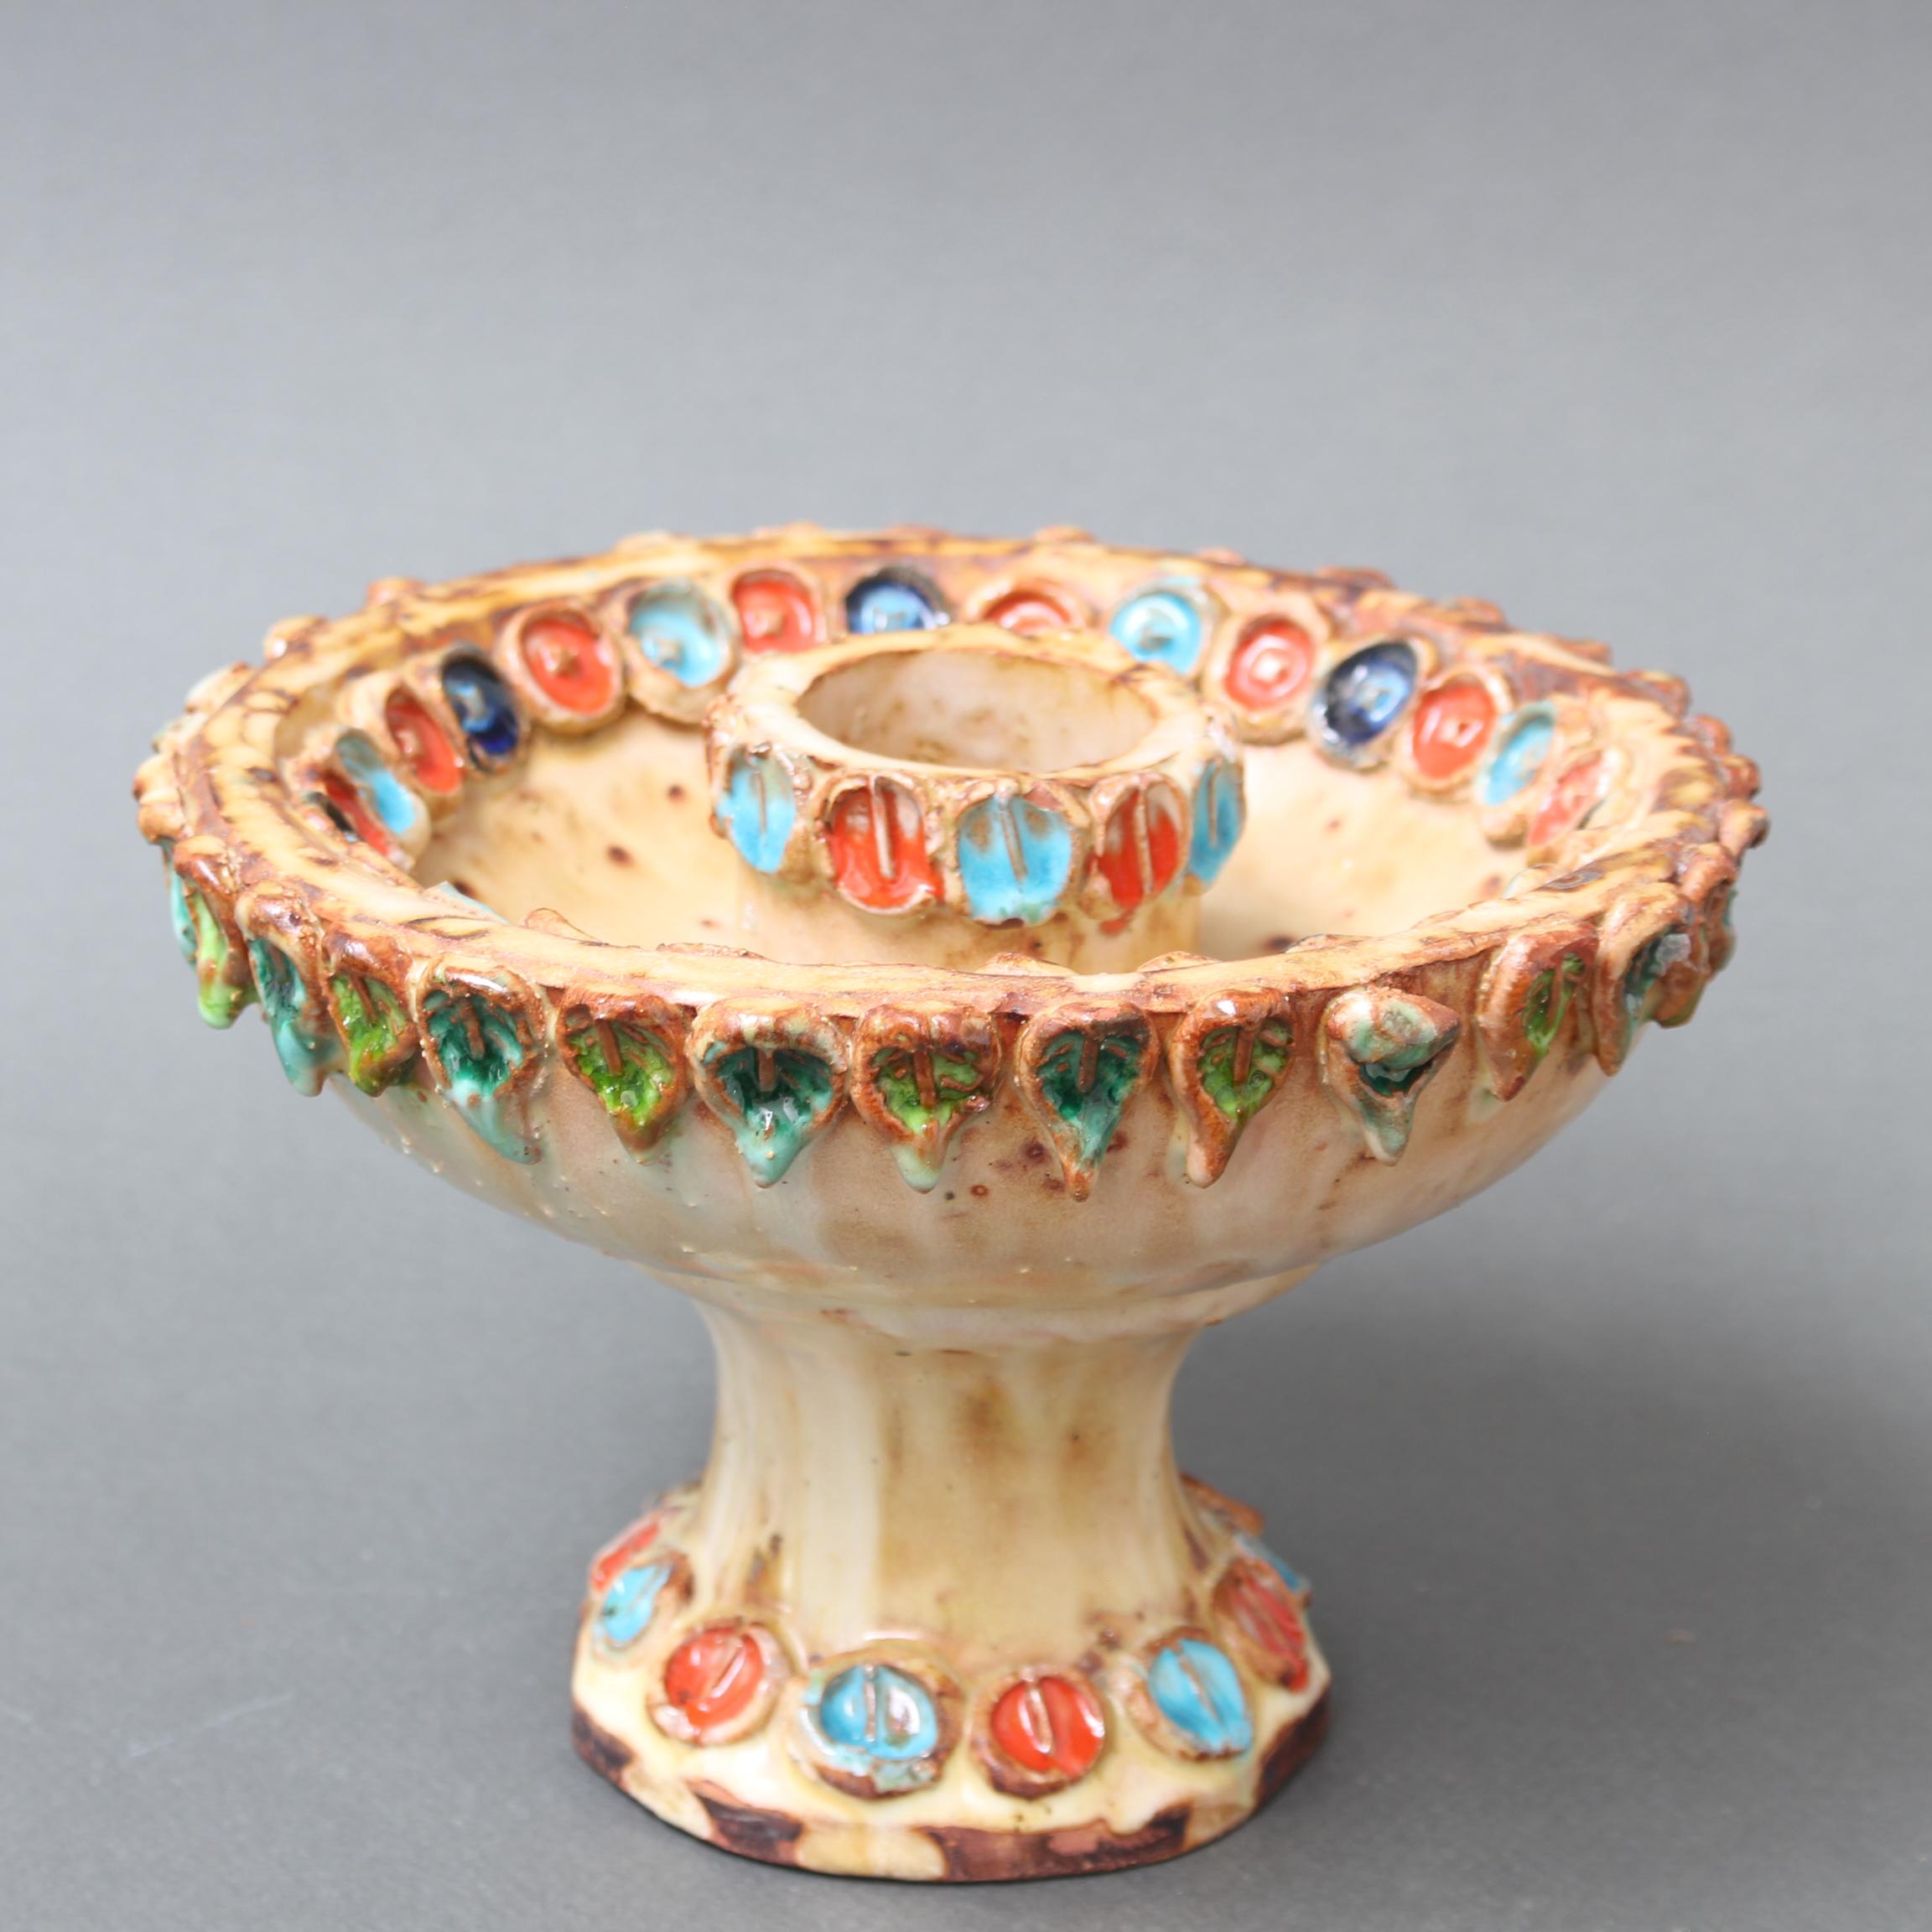 Vintage French Ceramic Candle-Holder by La Roue (circa 1960s) For Sale 9